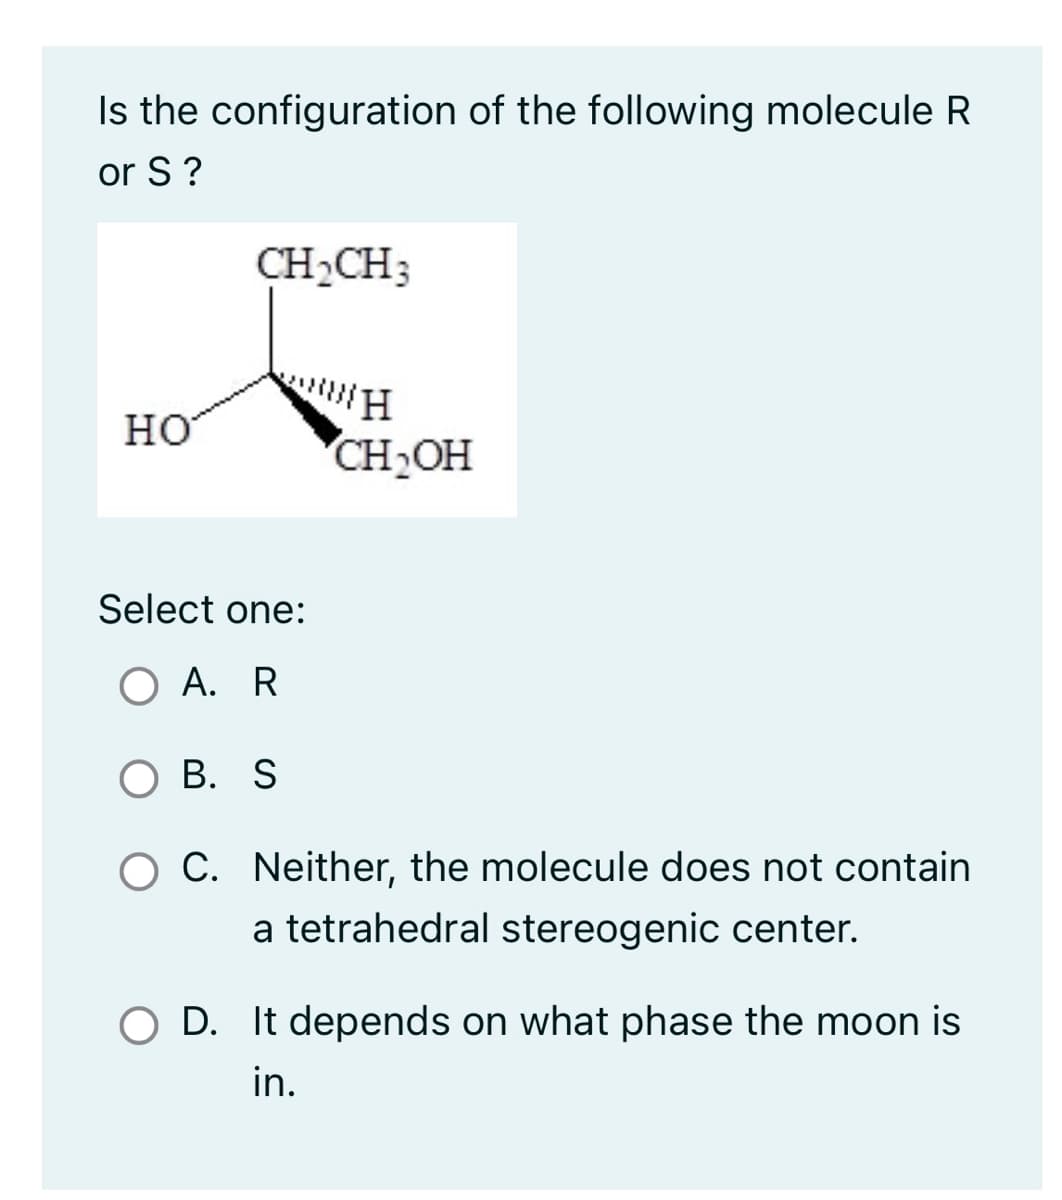 Is the configuration of the following molecule R
or S?
HO
CH₂CH3
H
CH₂OH
Select one:
O A. R
OB. S
C. Neither, the molecule does not contain
a tetrahedral stereogenic center.
OD. It depends on what phase the moon is
in.